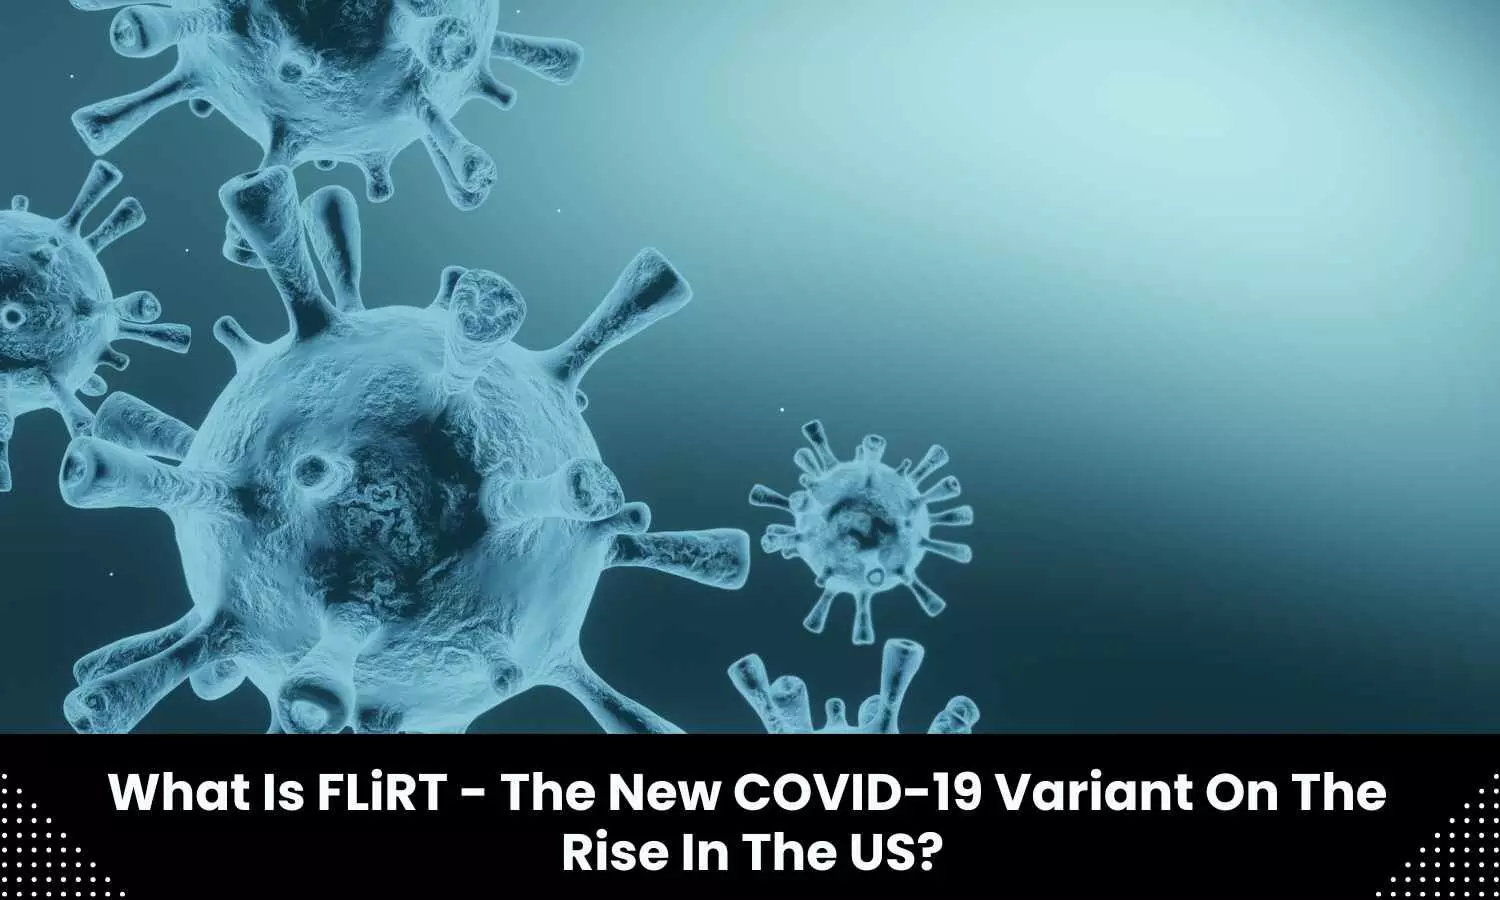 New COVID 19 variant FLiRT spreads in US